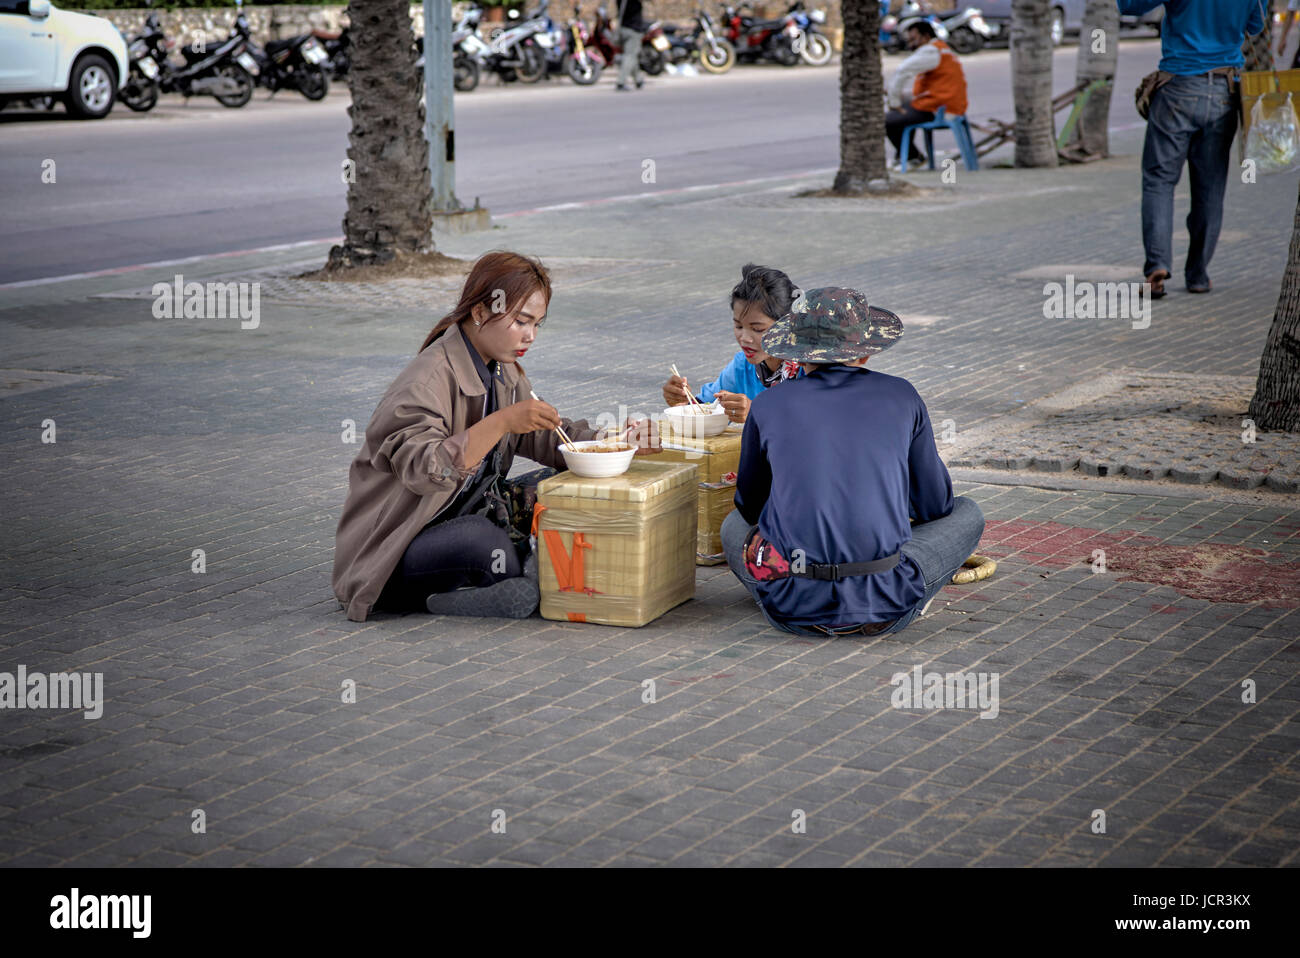 Thailand people eating on the street, Pattaya, Southeast Asia Stock Photo